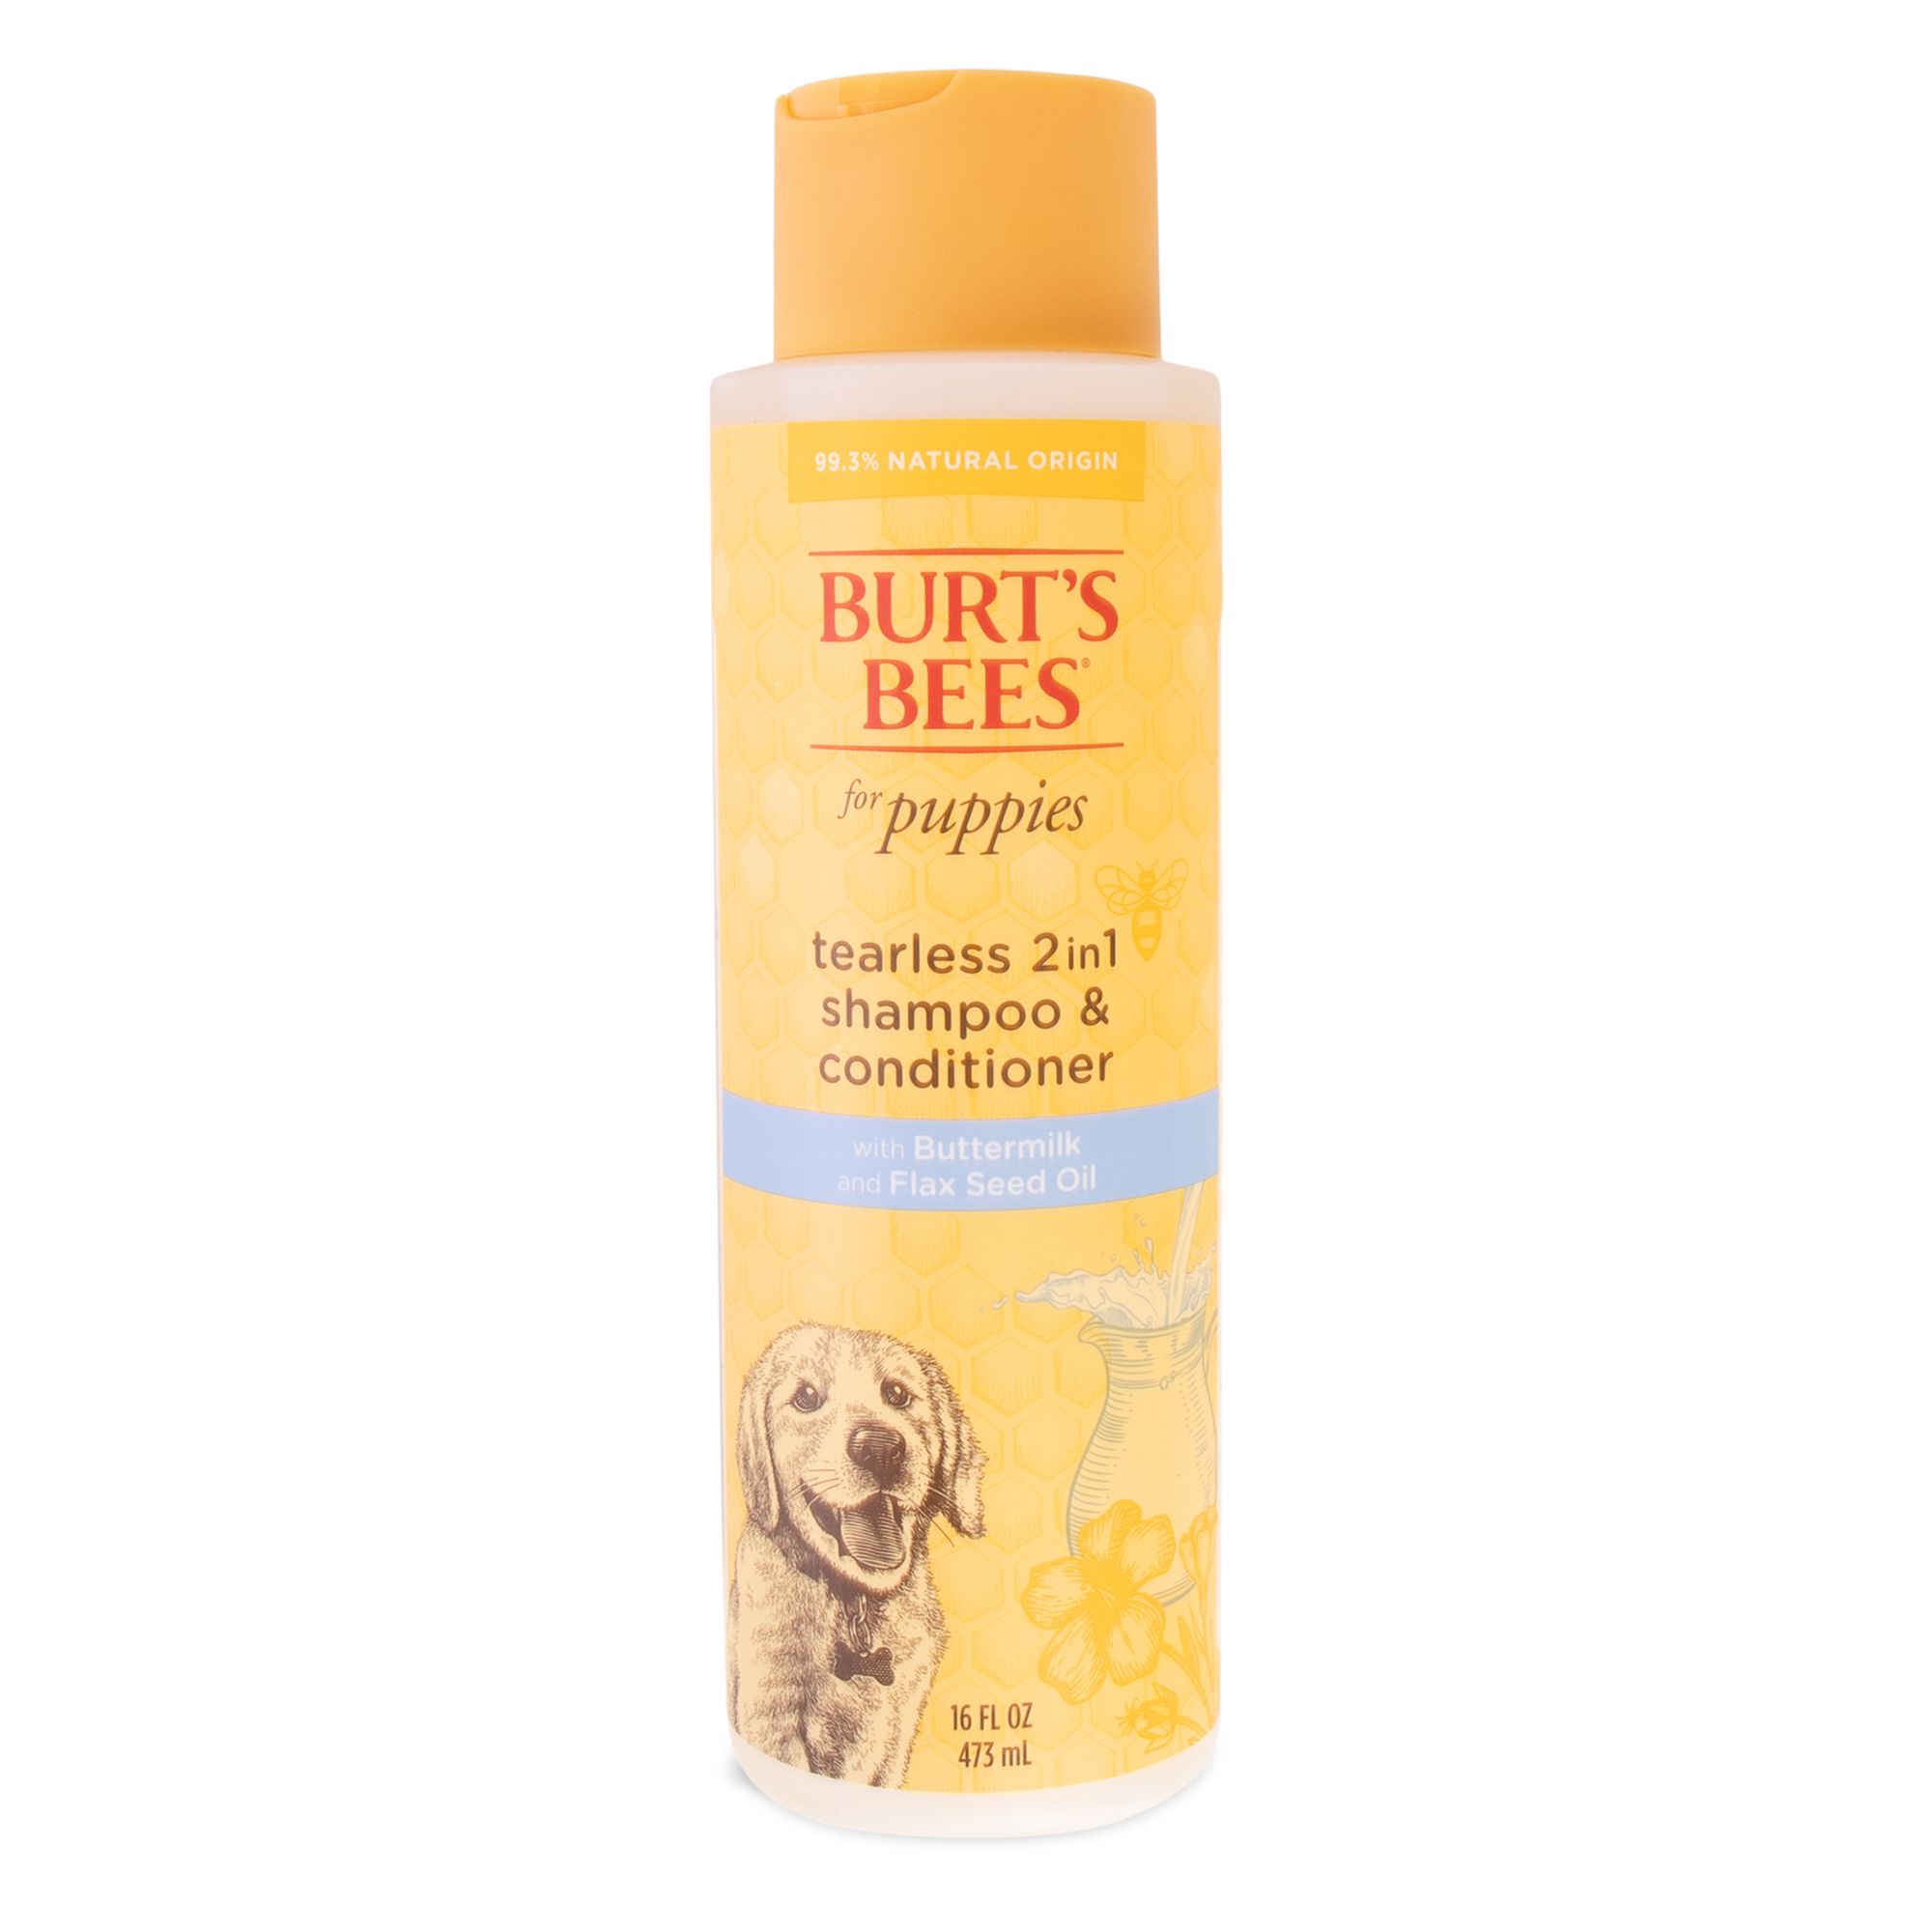 Burts Bees - Ear Cleaning Solution for Dogs – Des Moines IA, West Des  Moines IA, Urbandale IA